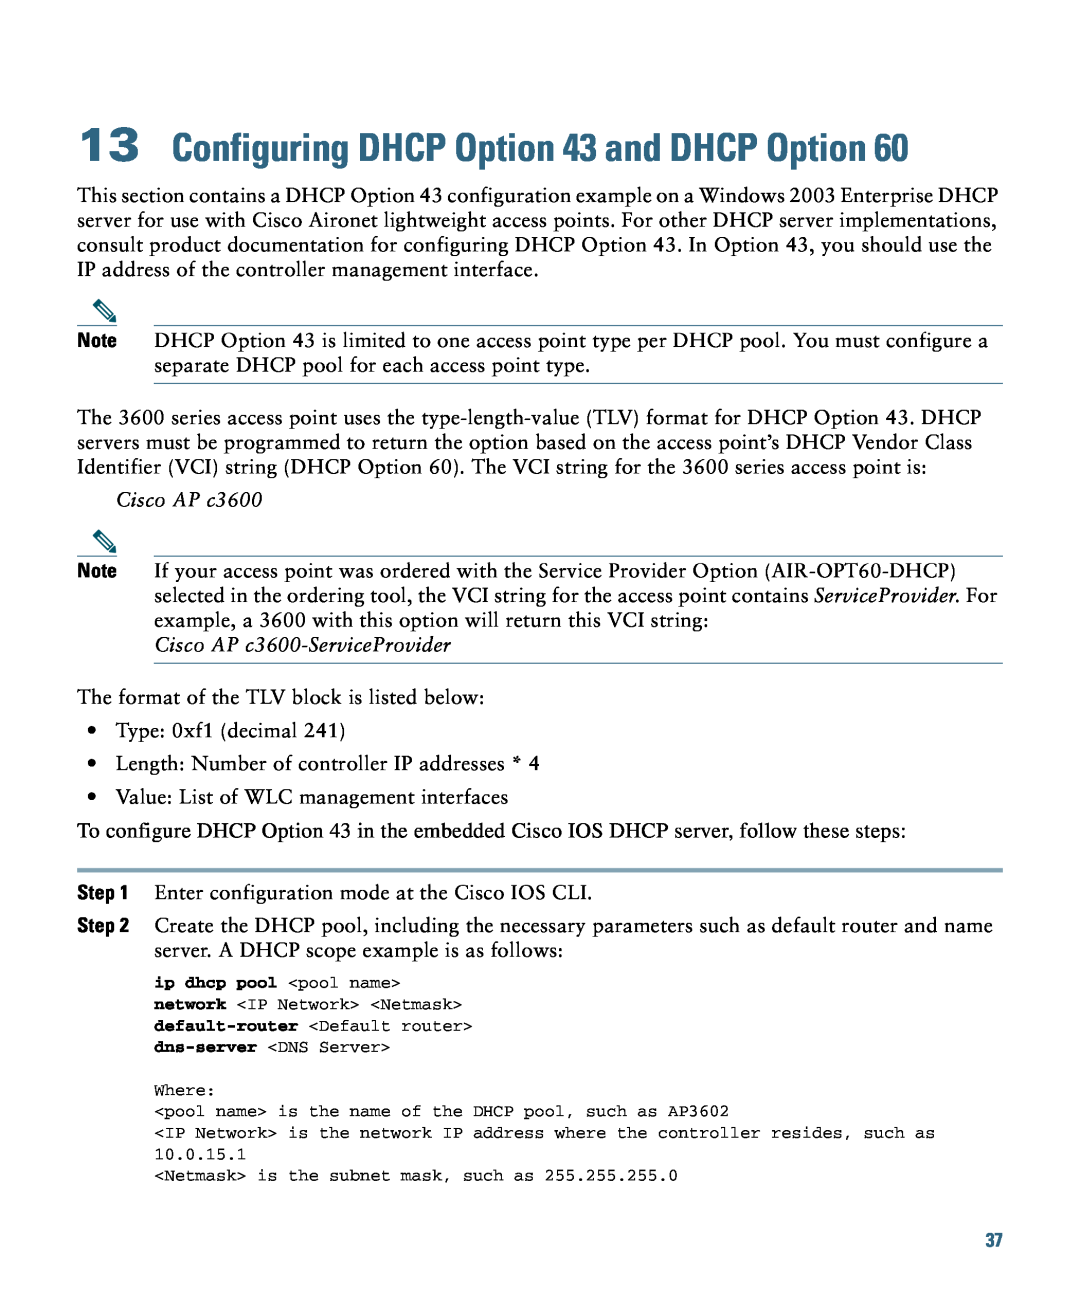 Cisco Systems AIRCAP3602IAK9RF Configuring DHCP Option 43 and DHCP Option, Cisco AP c3600-ServiceProvider 